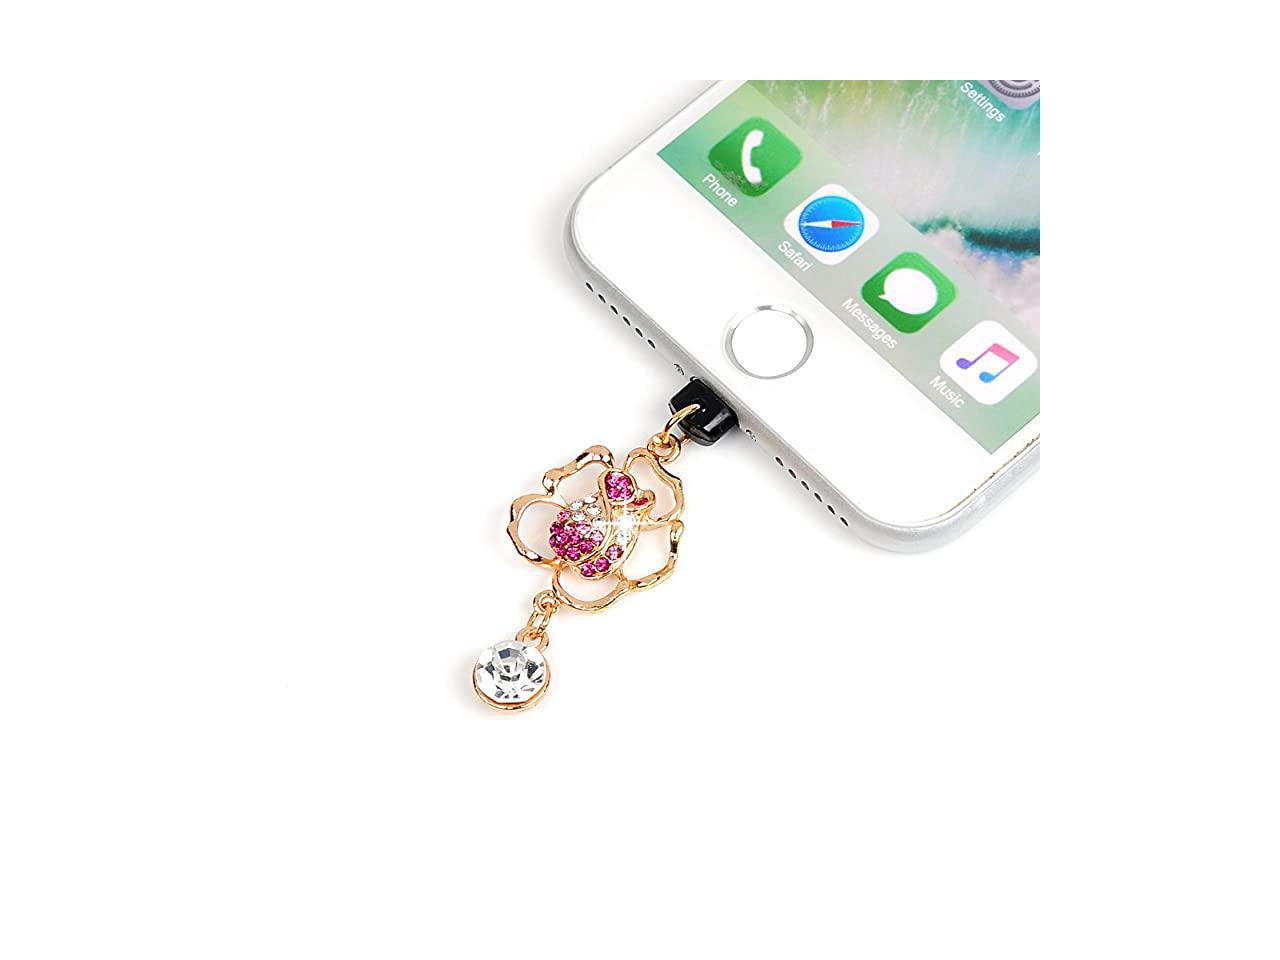 Red Rose&Blue Butterfly Tassel Maviss Diary 2 Pcs Cute Bling Diamond Dust Plugs/Cell Charms for iPhone 7 Plus,iPhone 6S Plus,iPhone SE 5.5 4.7 4.0 iPhone Charging Cable Jack 